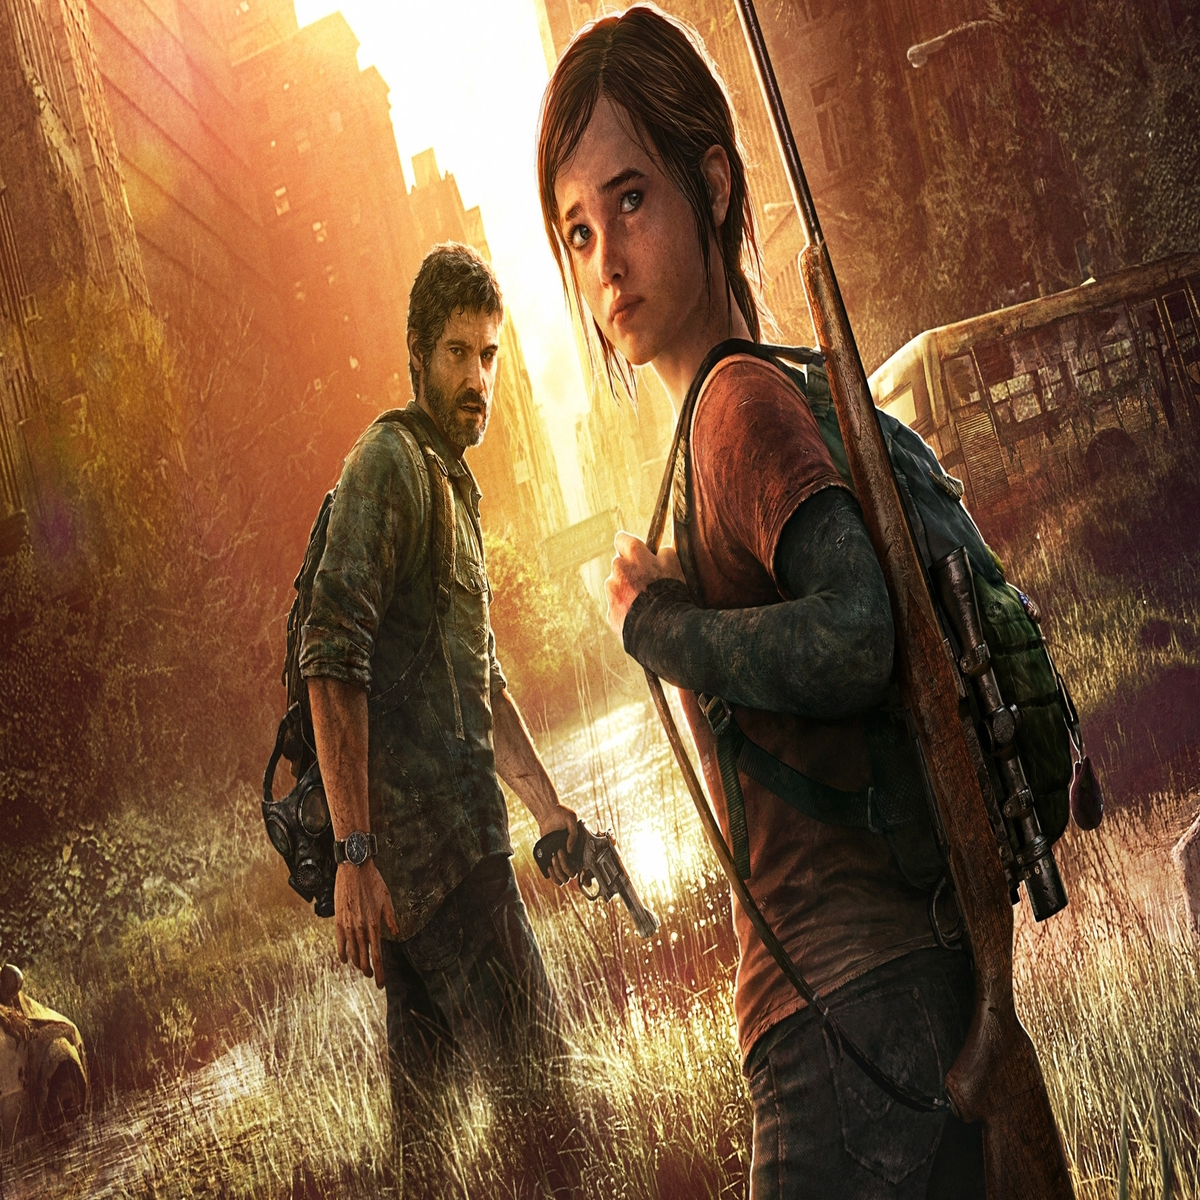 I have bought first TLOU on PS3 in 2023 : r/playstation